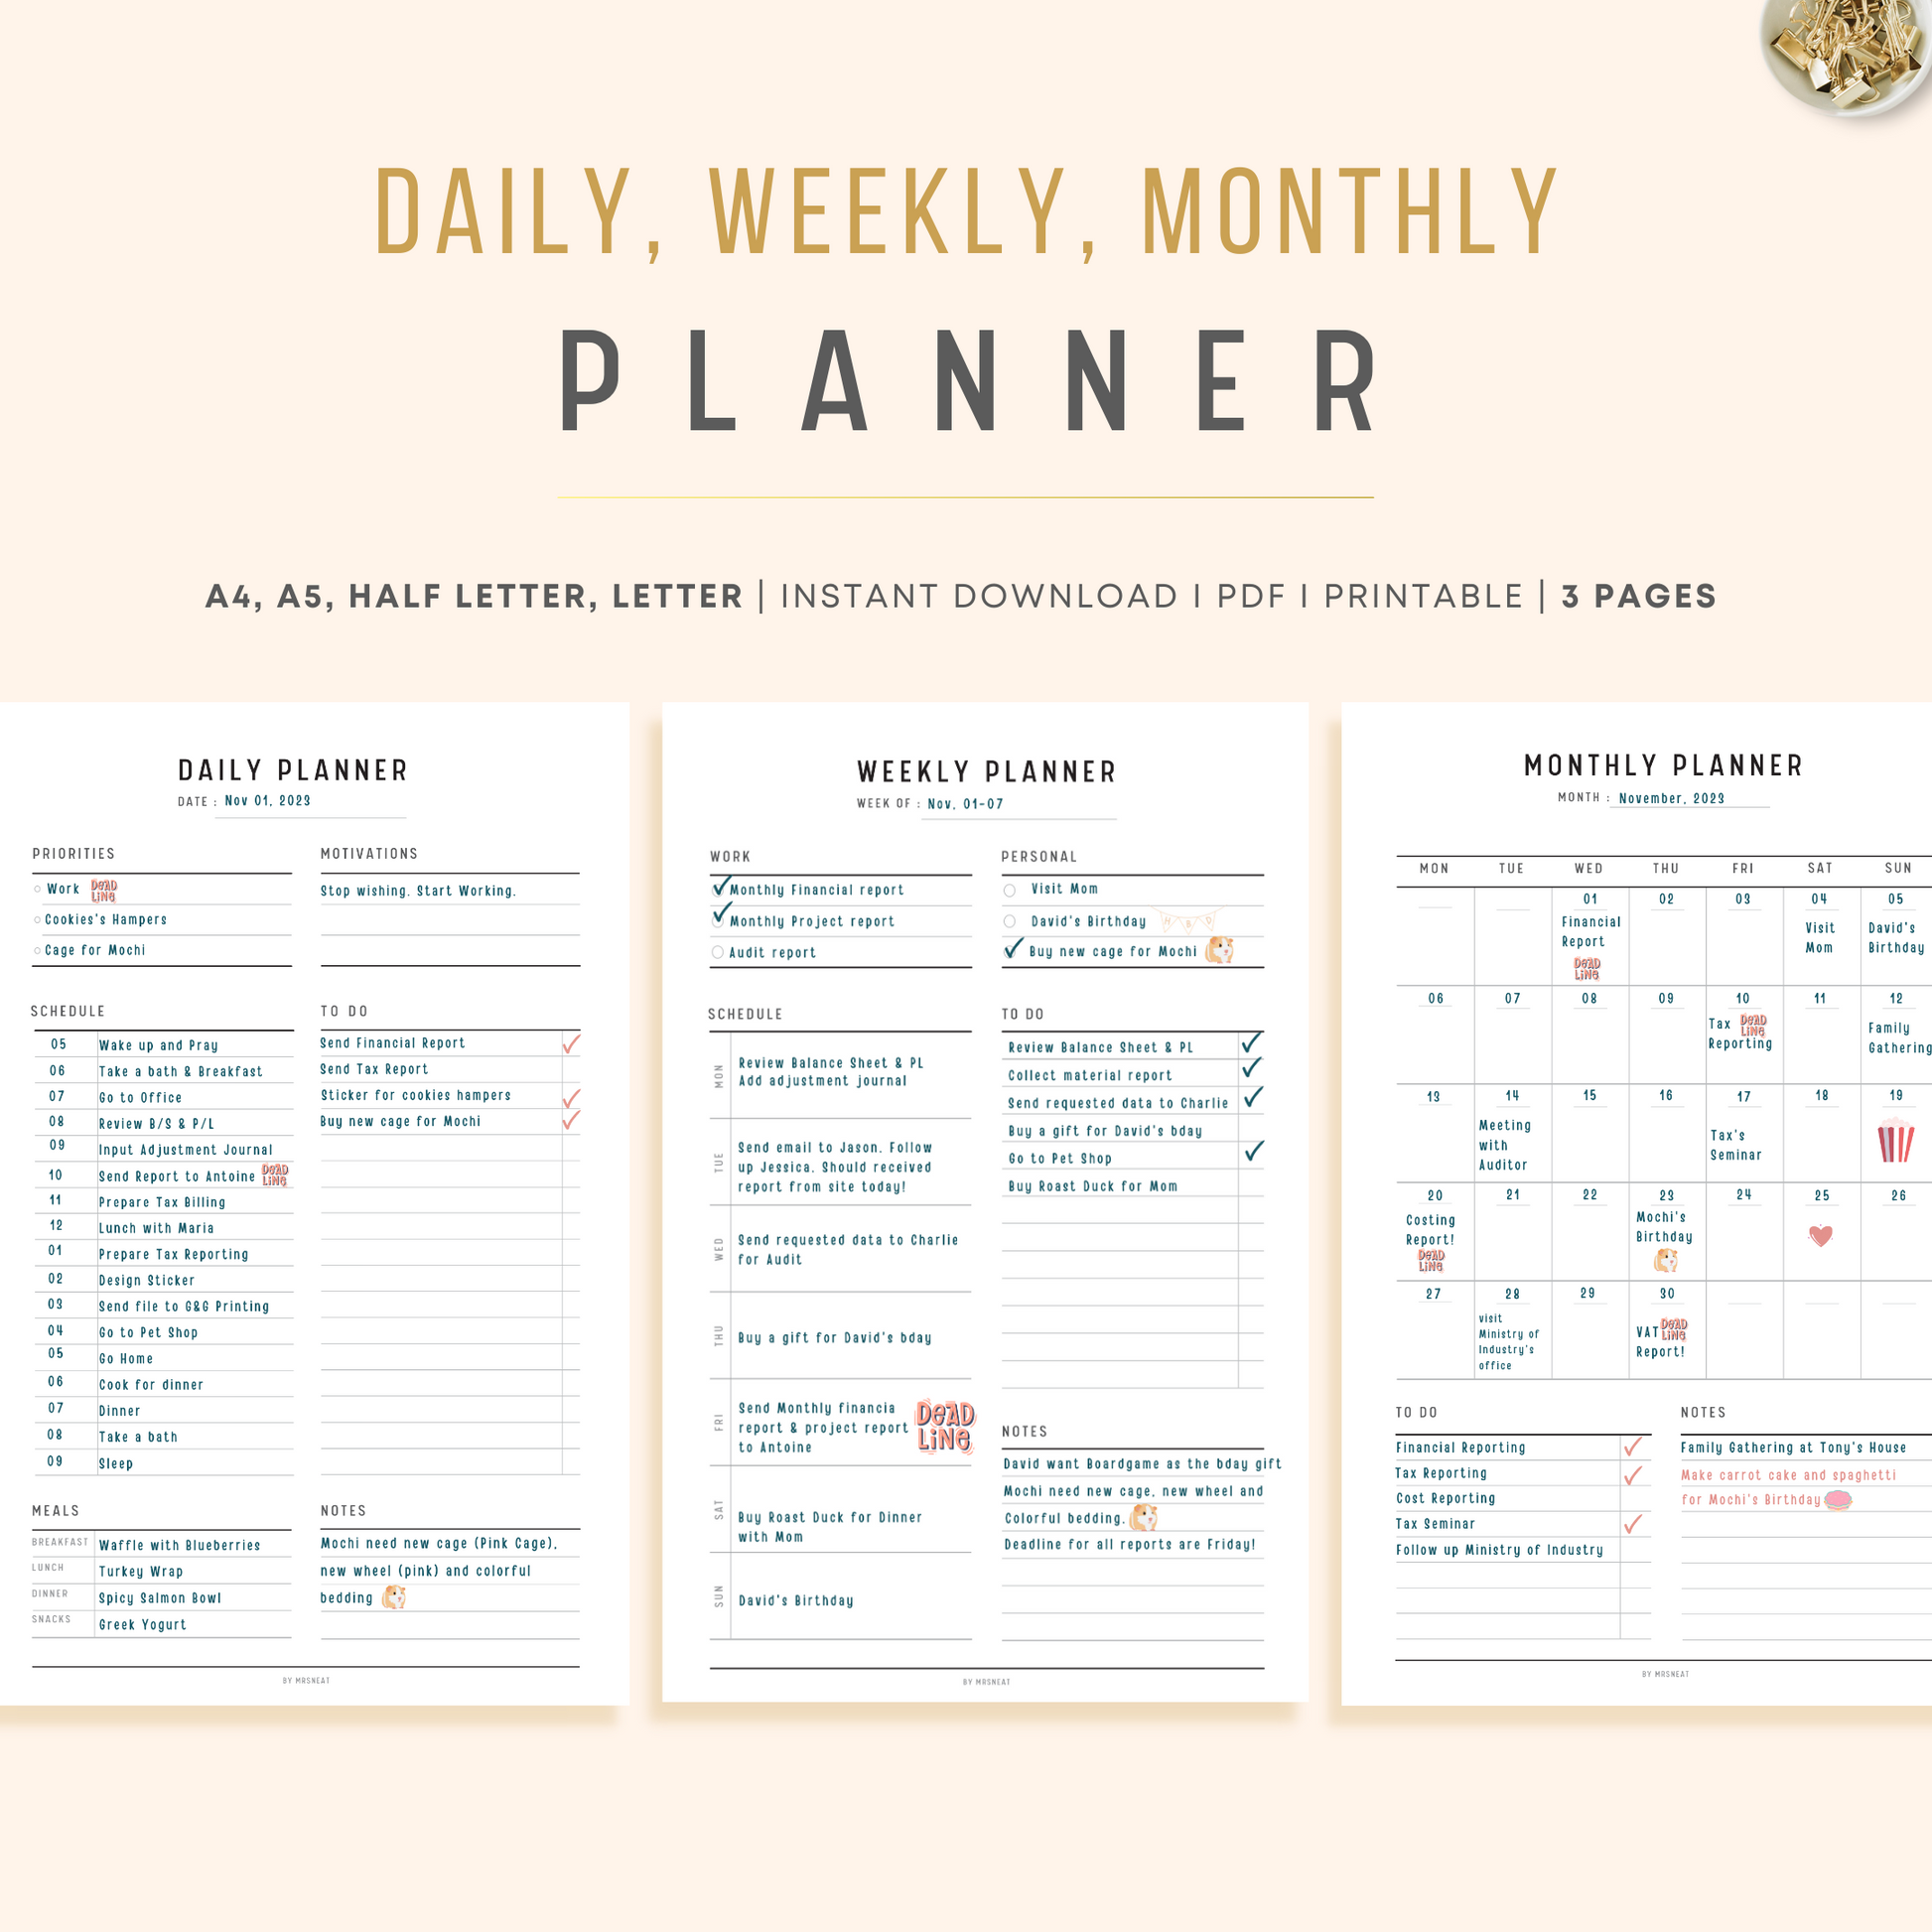 Daily, Weekly and Monthly Planner Printable in Minimalist and Clean Design